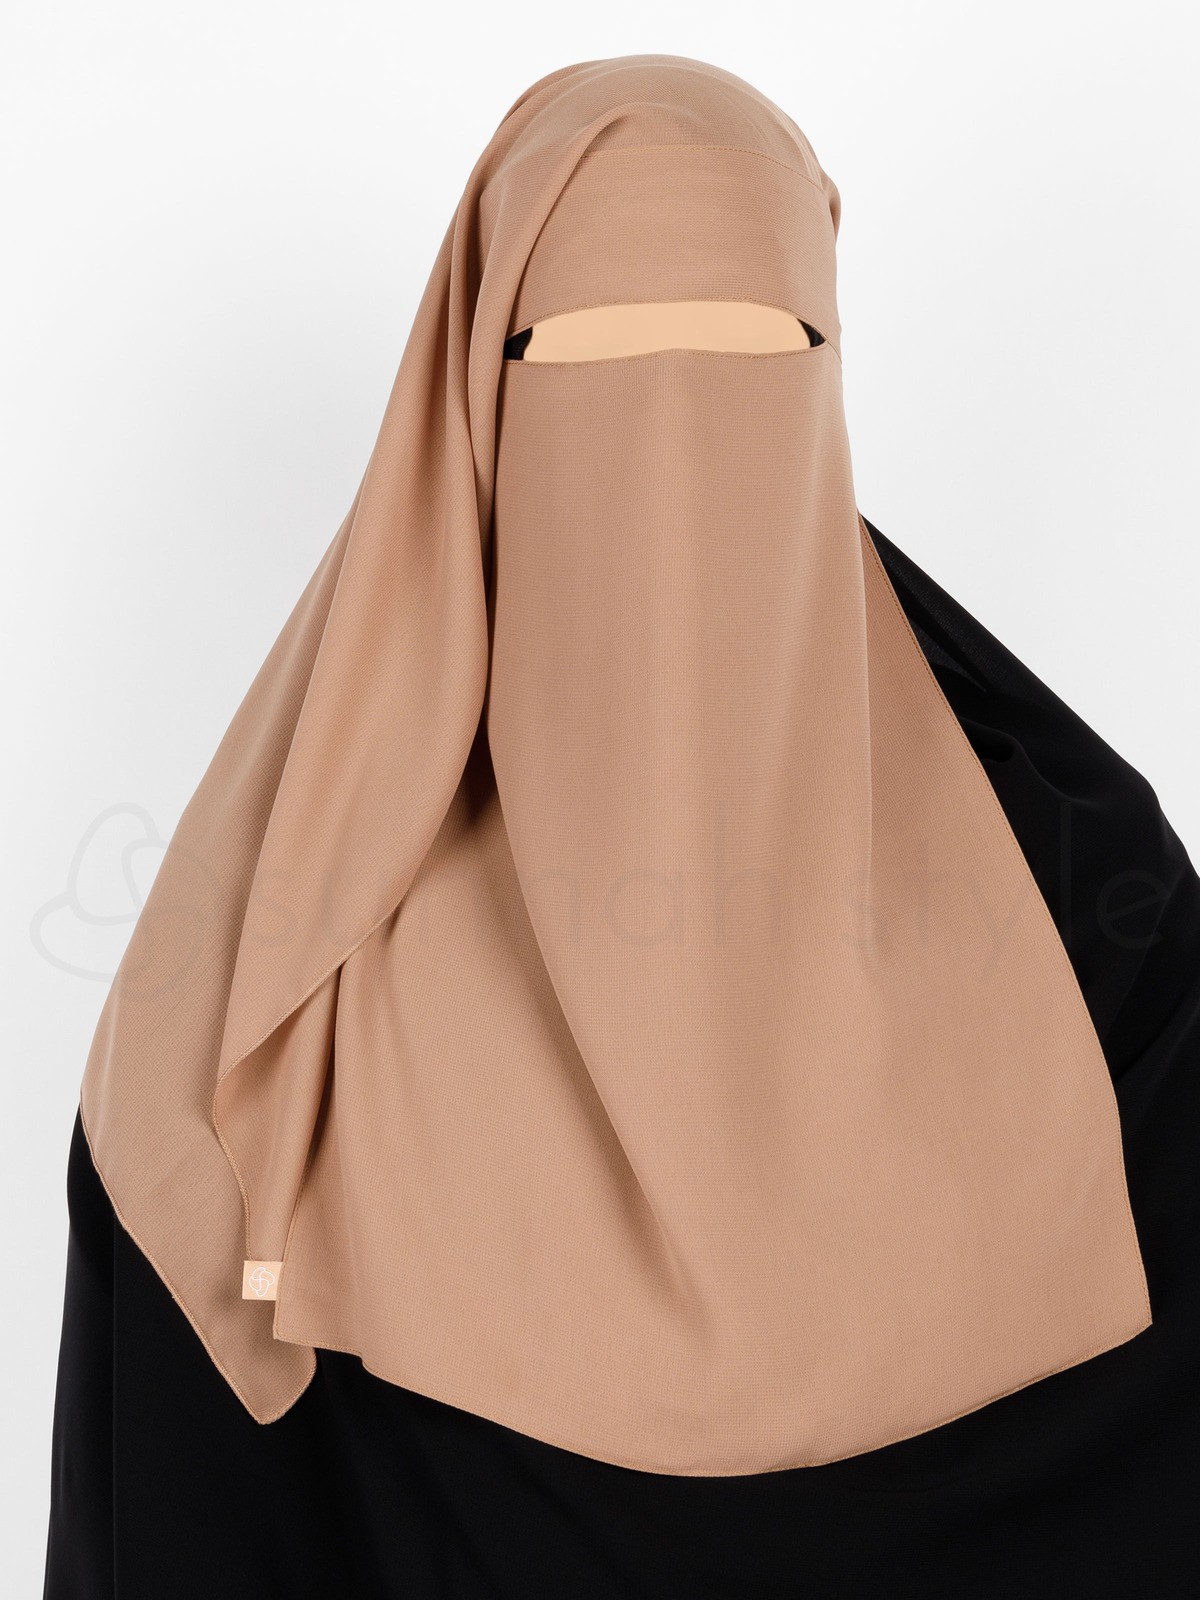 Sunnah Style - Two Layer Niqab (Burgundy)